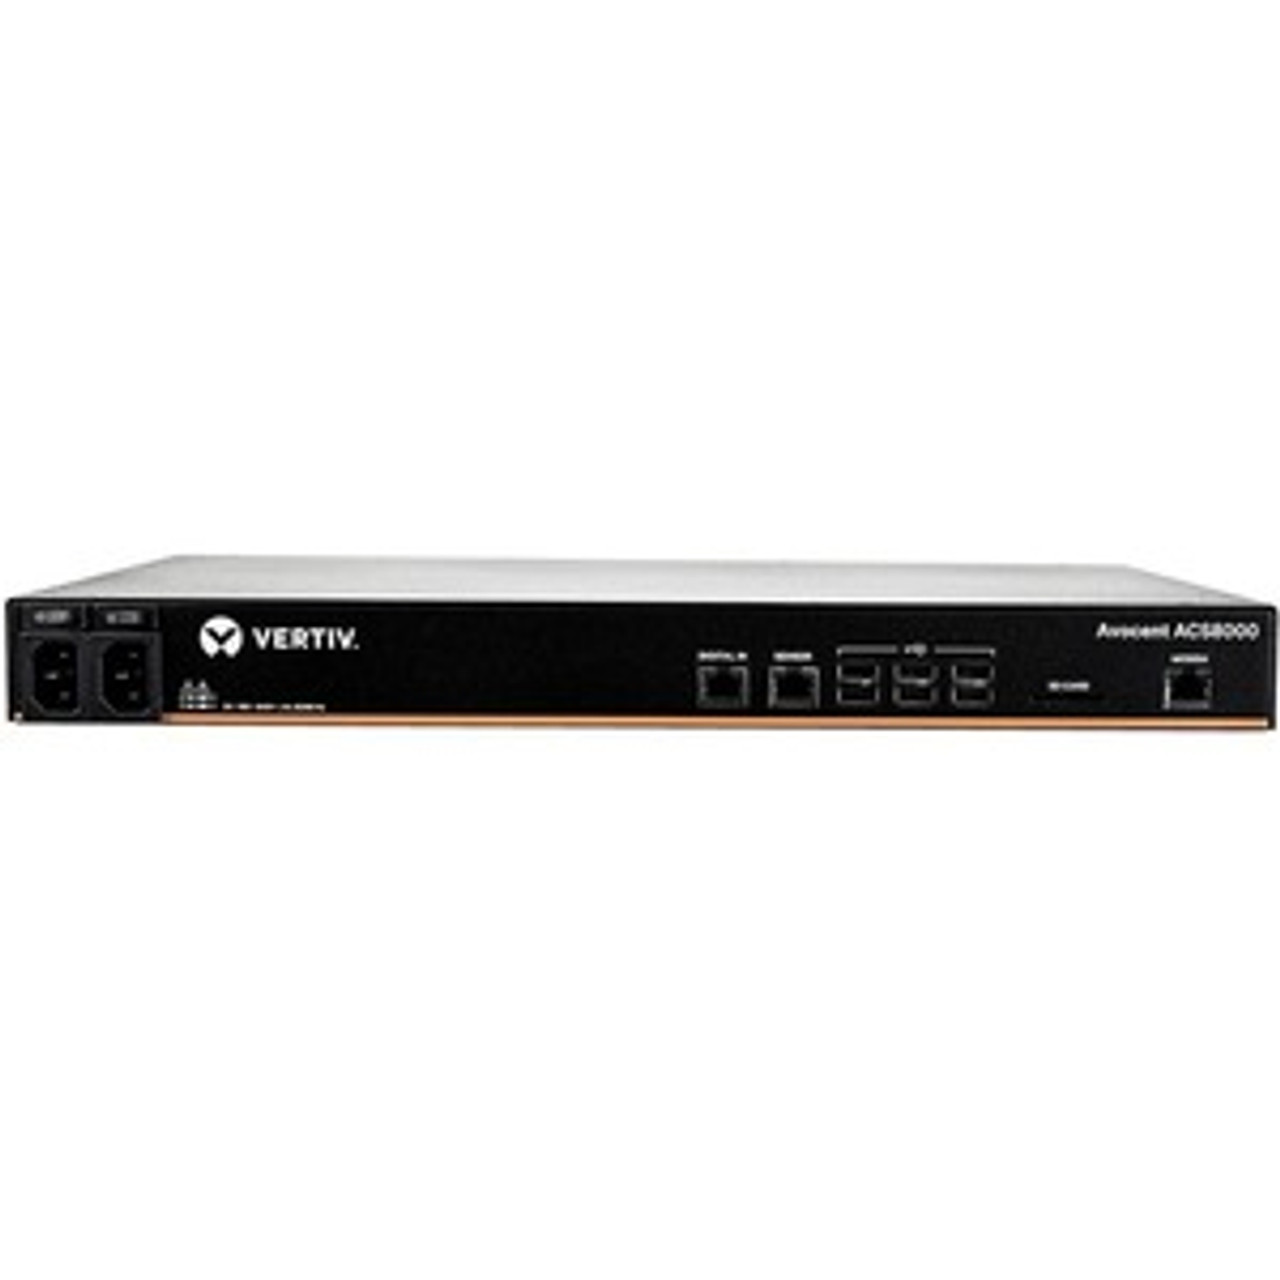 ACS8016MDAC-404 Avocent 16-Ports Acs 8000 Consvr W Dual Perp Ac Pwr Supl & Built-in Modem